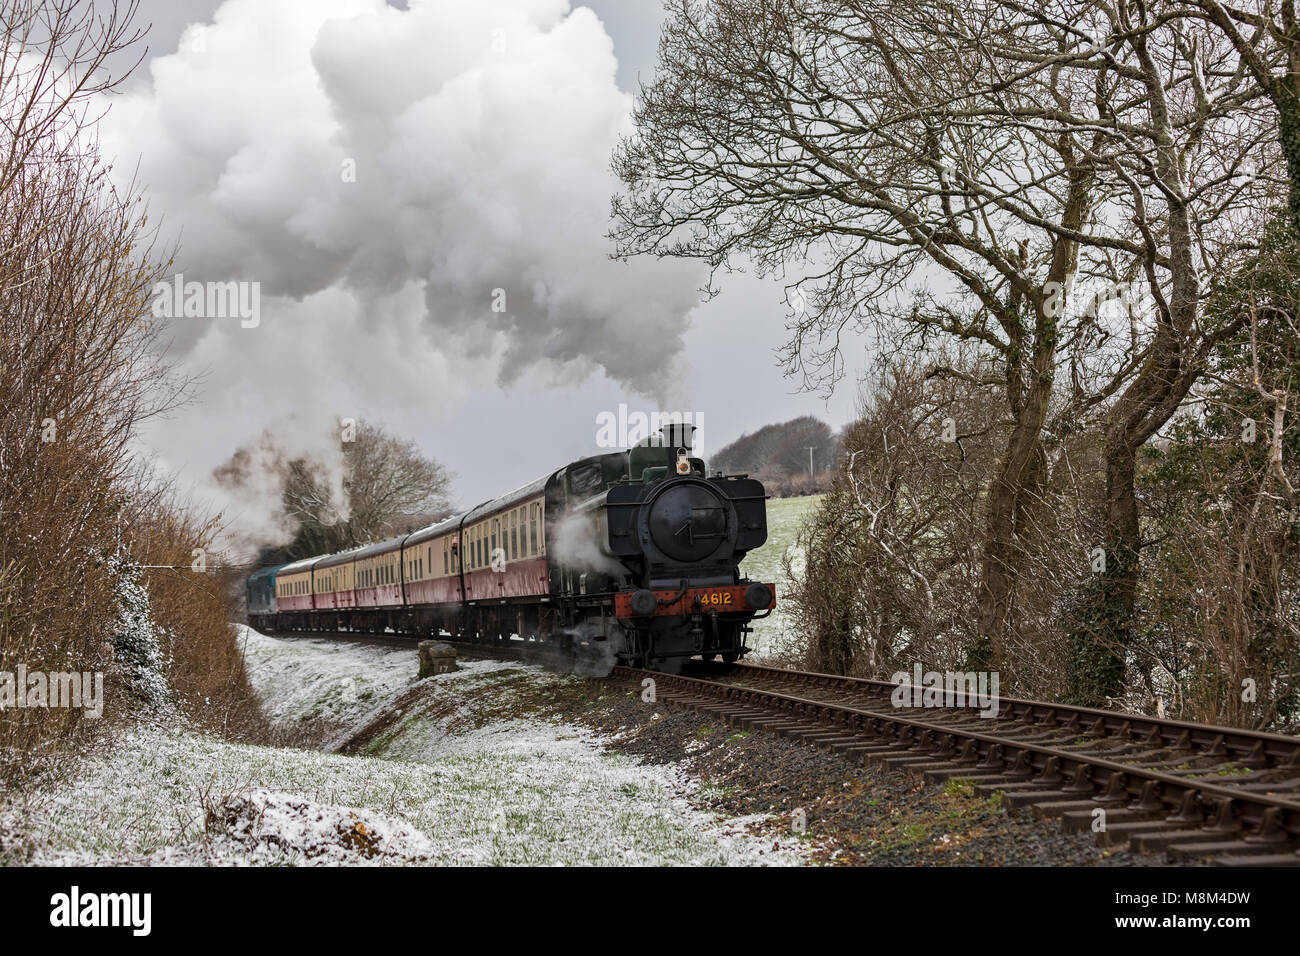 Bodmin & Wenford Steam Railway, Bodmin, Cornwall. 18, March, 2018. The mini Beast from the East, snow settling in Cornwall, Bodmin and Wenford Steam Railway trying to steam as normal. The 4612 hauling the 15:12 departure off Boscarne Junction through Westheath. © Barry Bateman / Alamy Live News Stock Photo